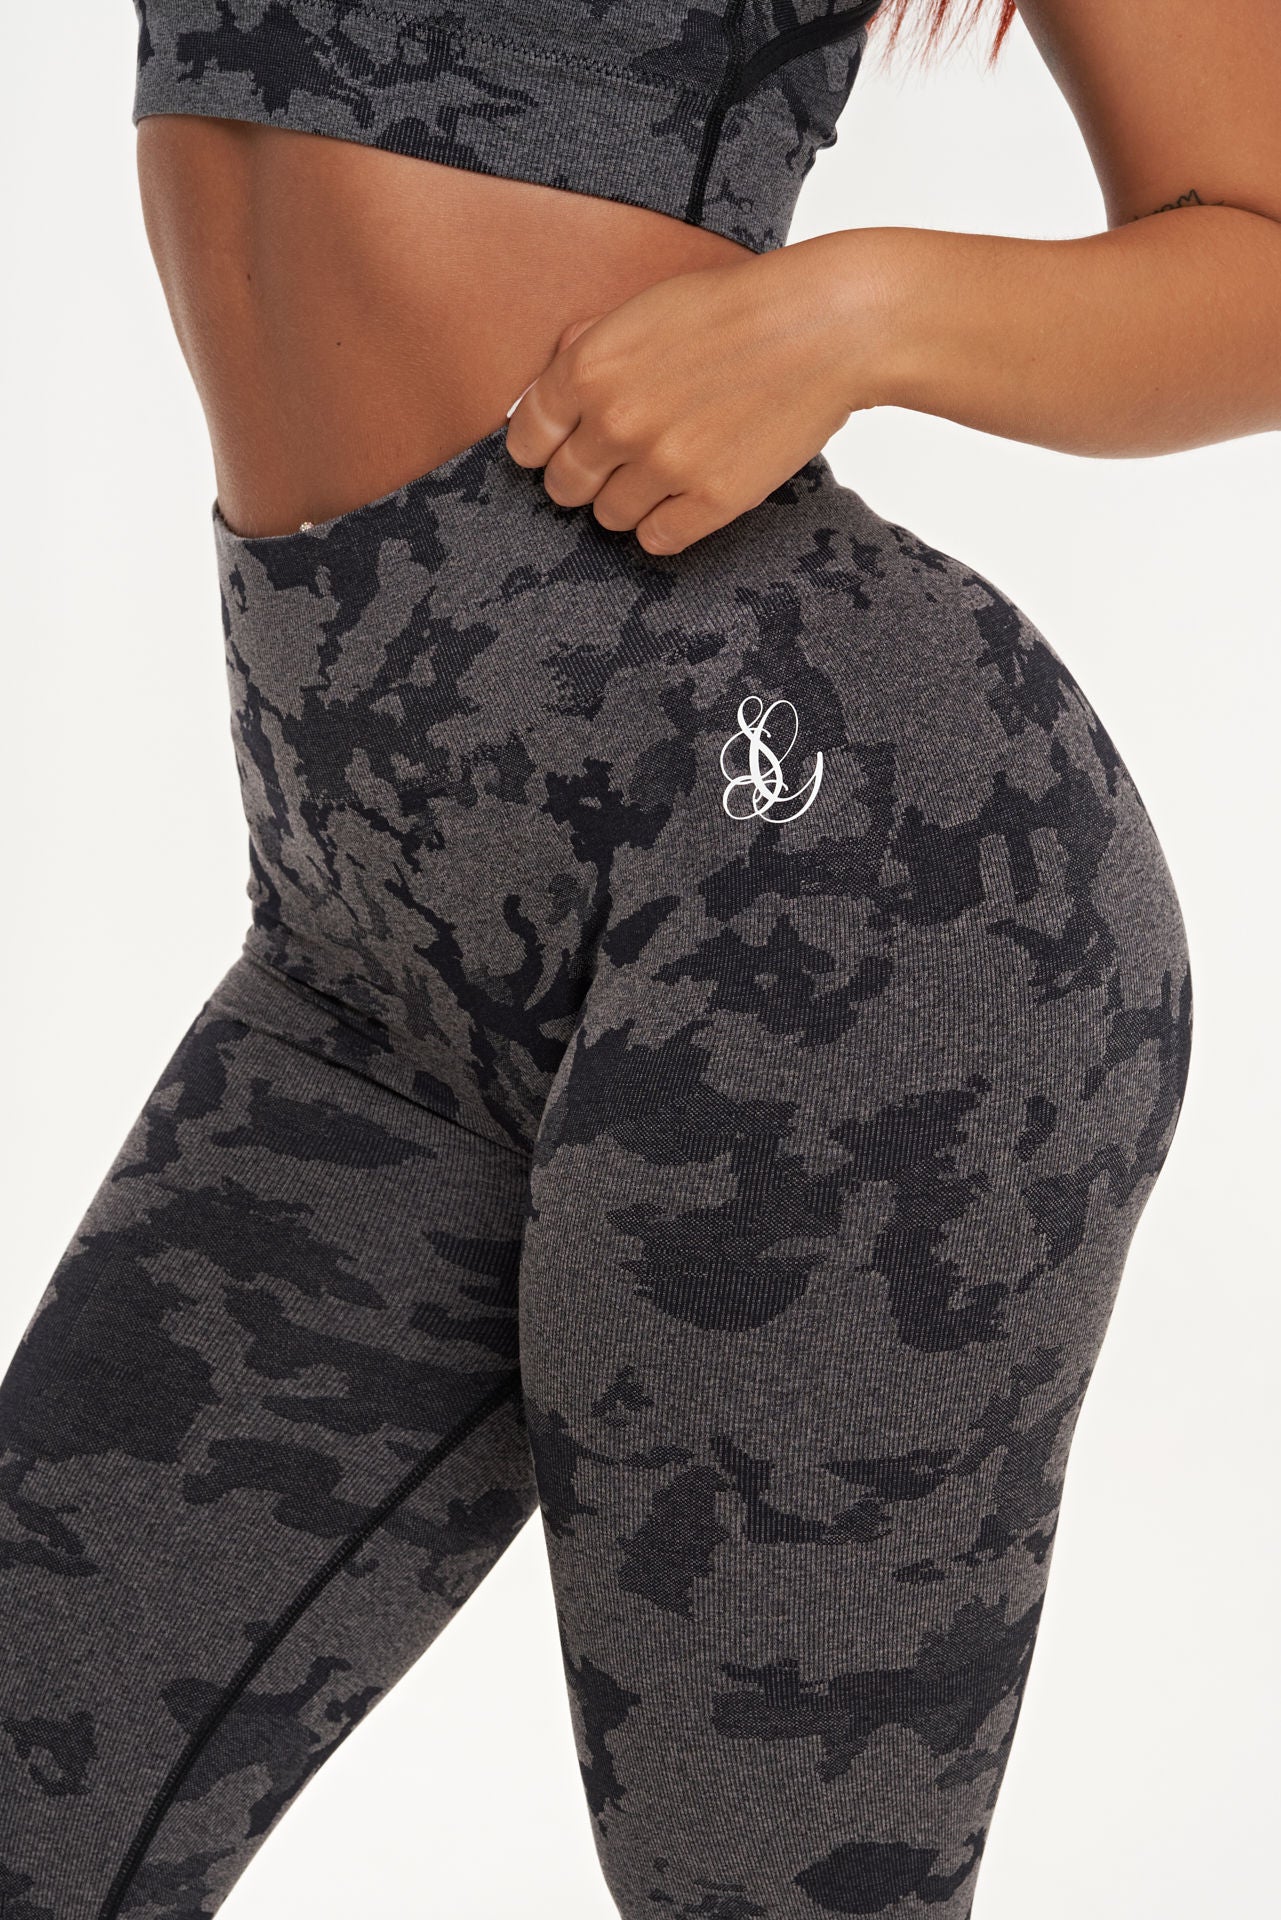 Camo Seamless High Waisted Leggings in Charcoal